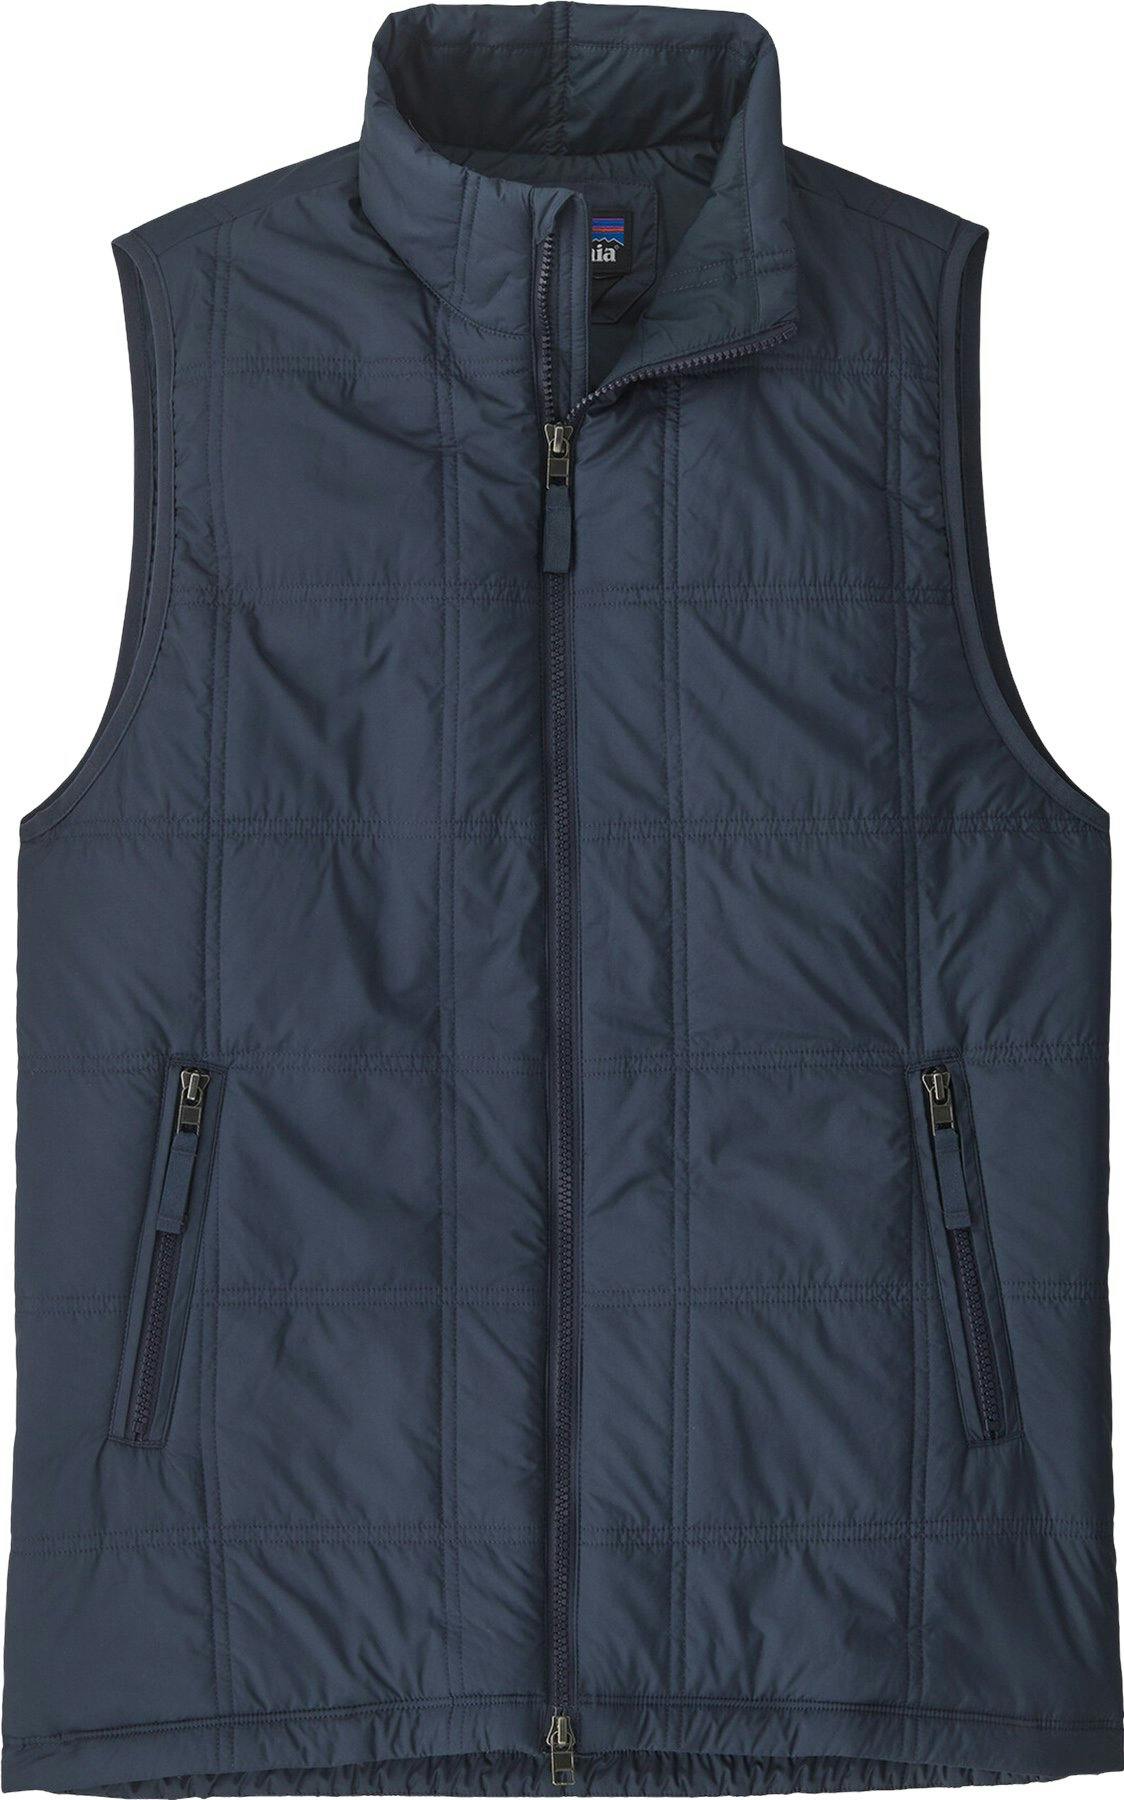 Product image for Lost Canyon Vest - Women's